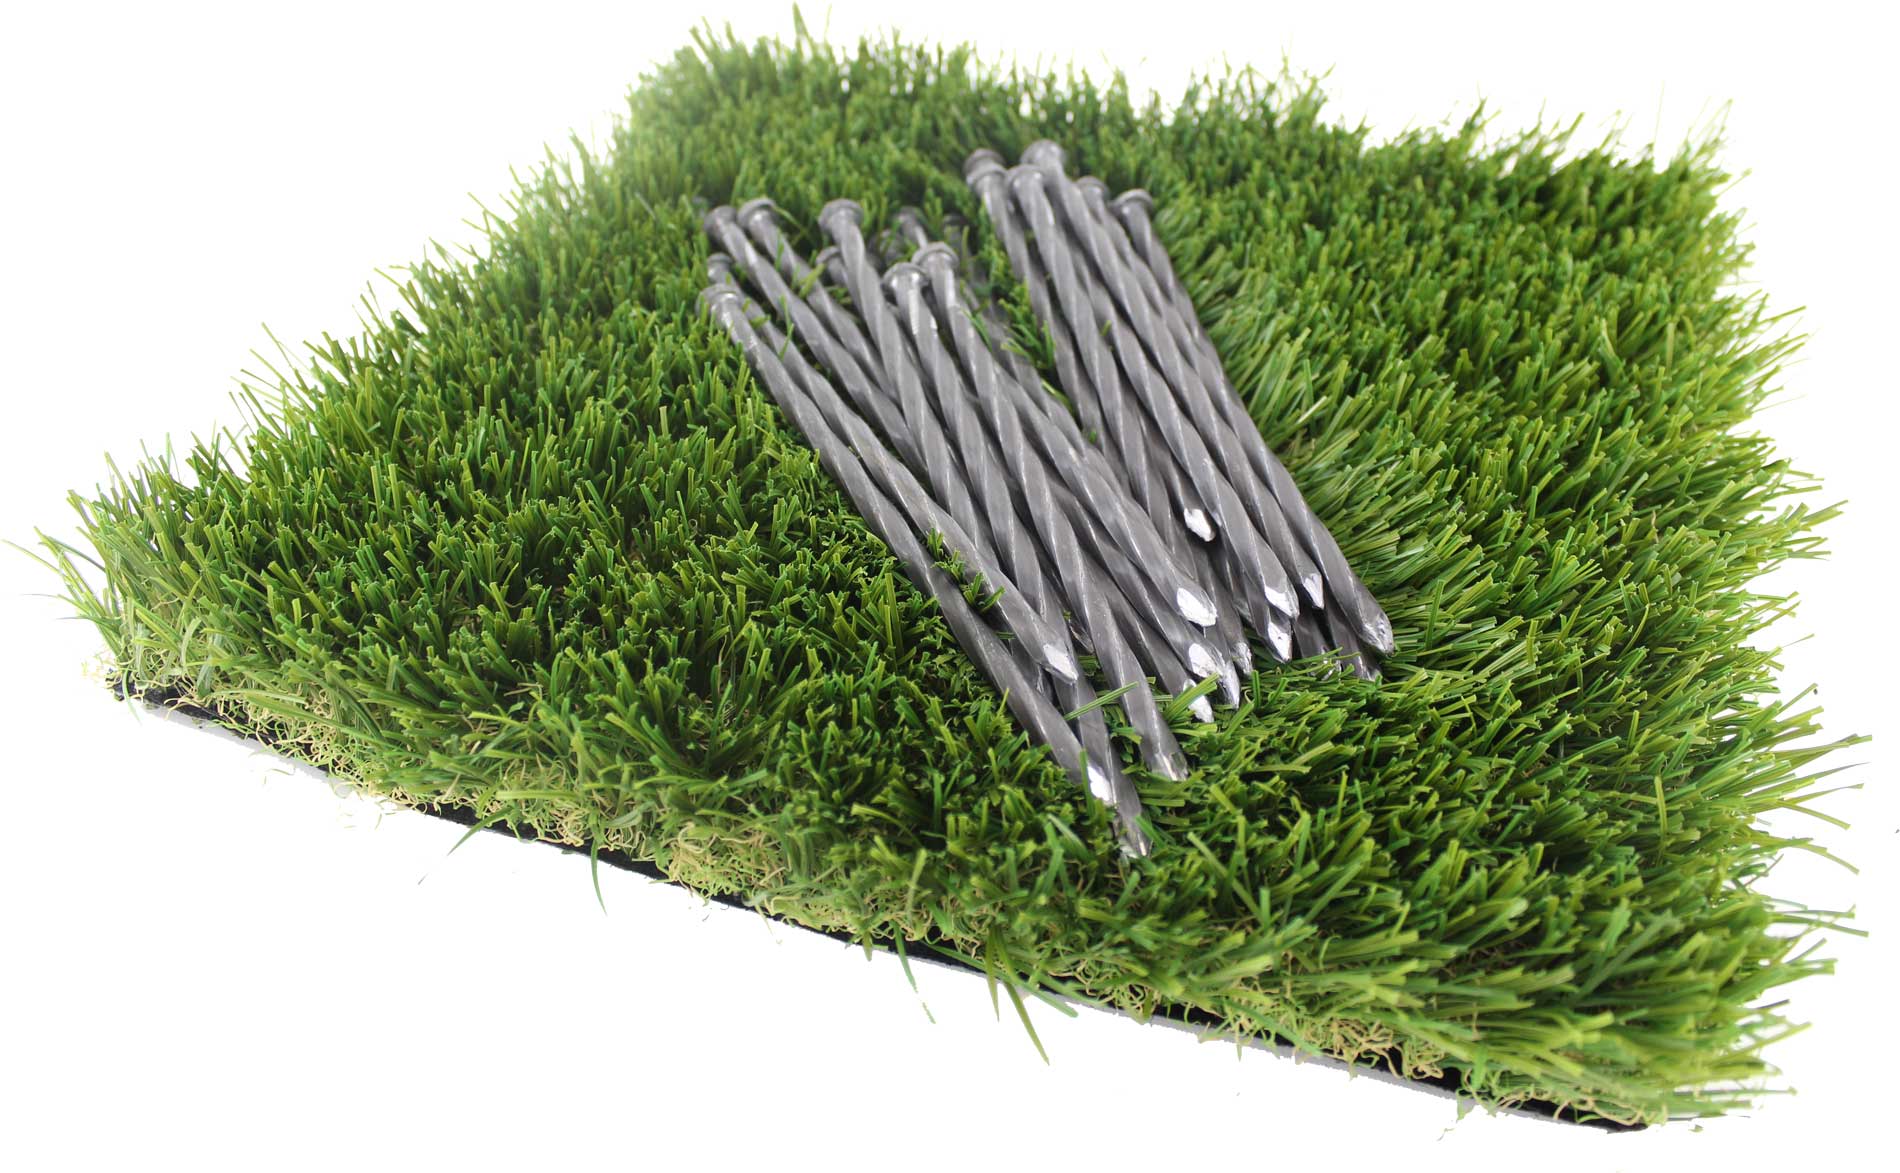 The Science Behind Securing Your Artificial Turf: Why 6-7 Inch Spiral Nails, Staples, Mallets and Correct Nail Density Matter